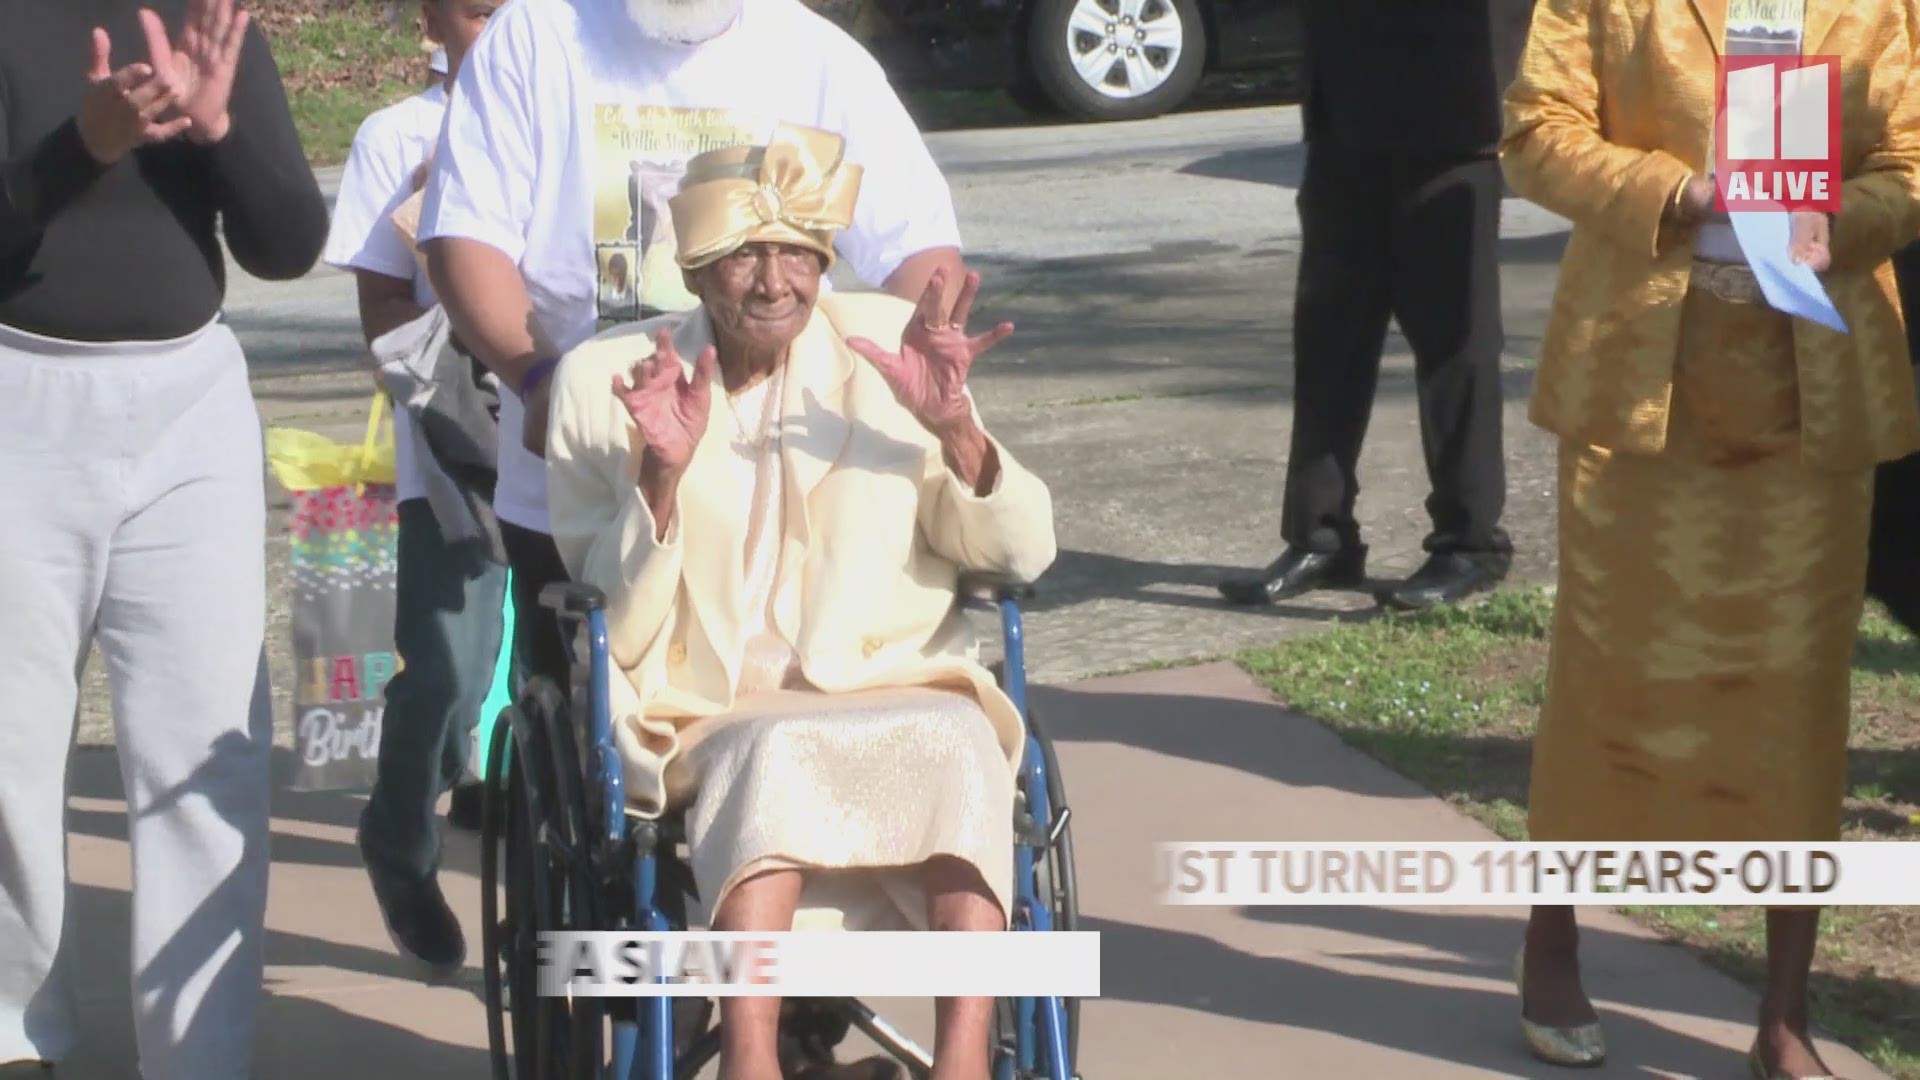 Willie Mae Hardy was born in 1908 and is the daughter of a slave. She celebrated her 111th birthday surrounded by family.